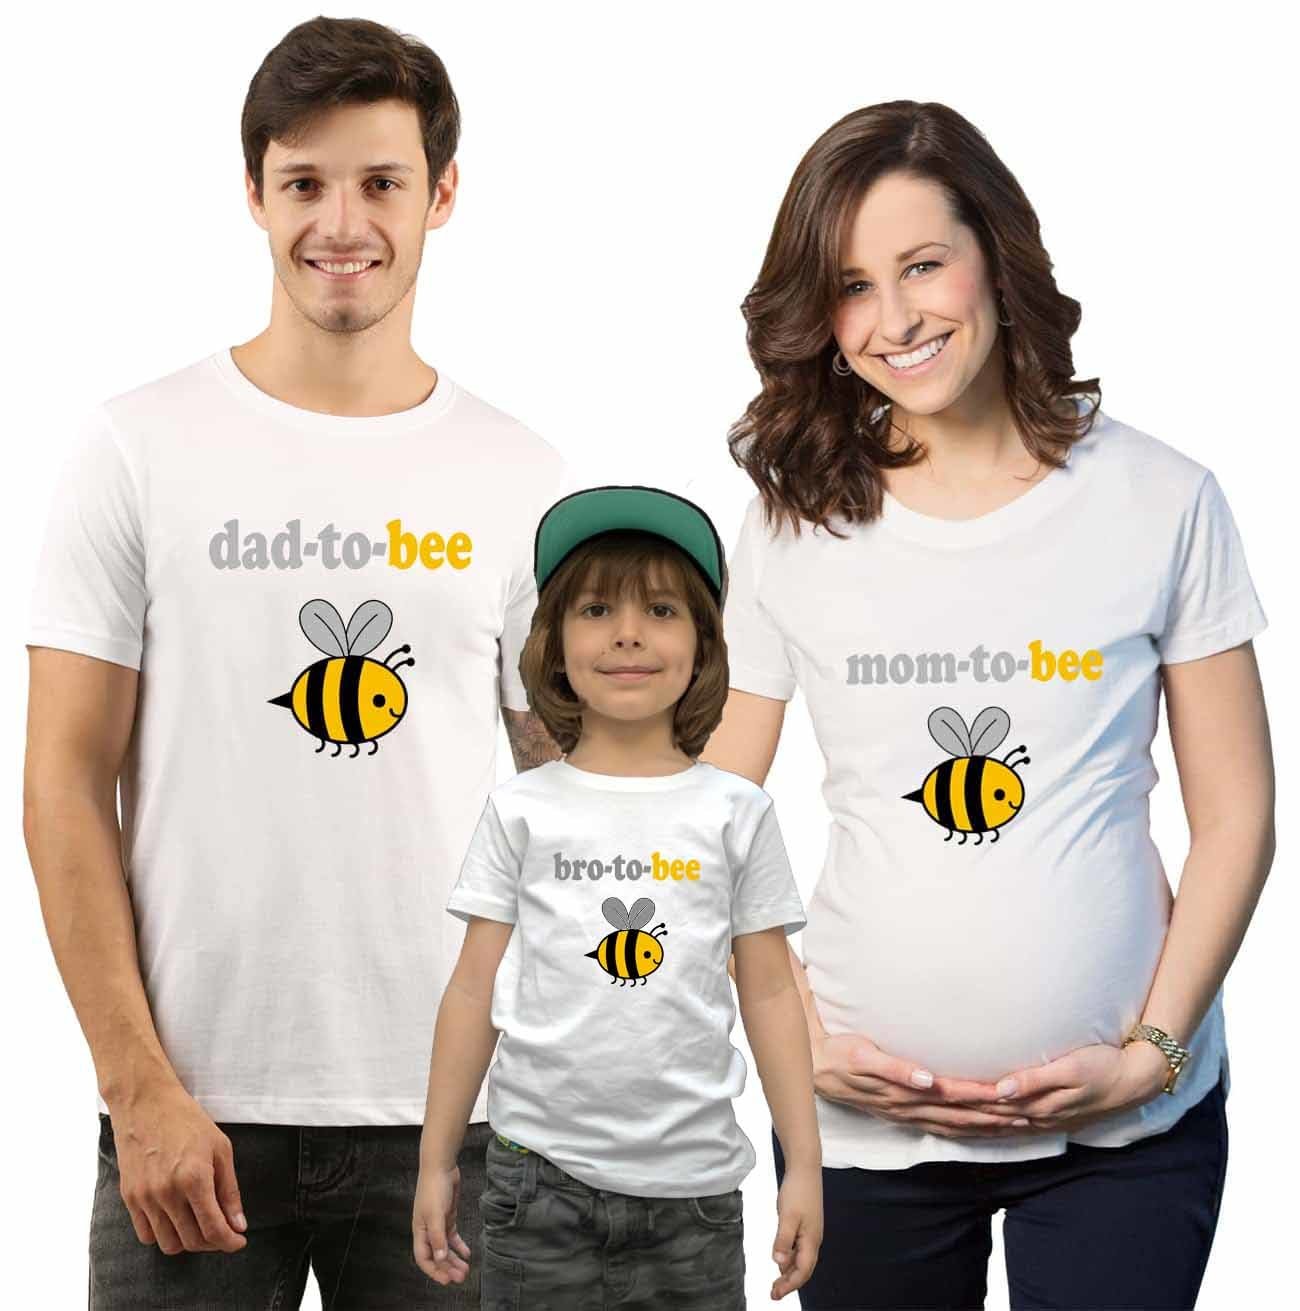 mom to bee dad bro parents to bee second pregnancy family tshirts matching new trend white